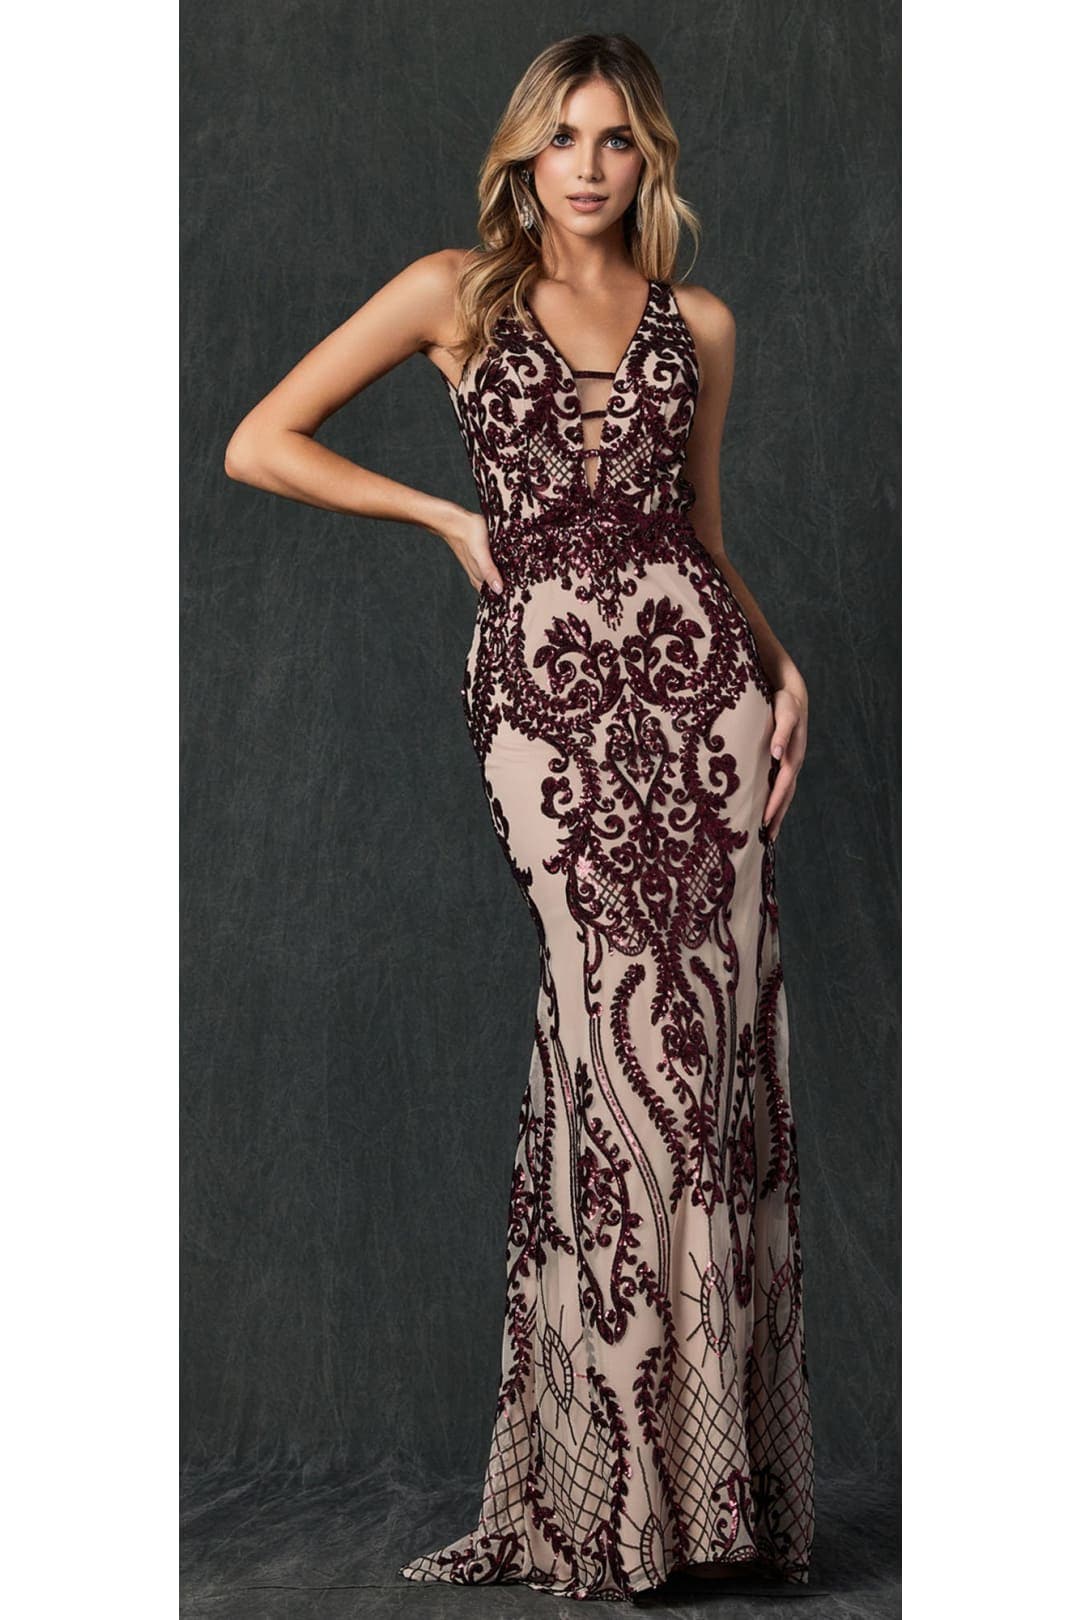 Sequined Mermaid Prom Evening Gown